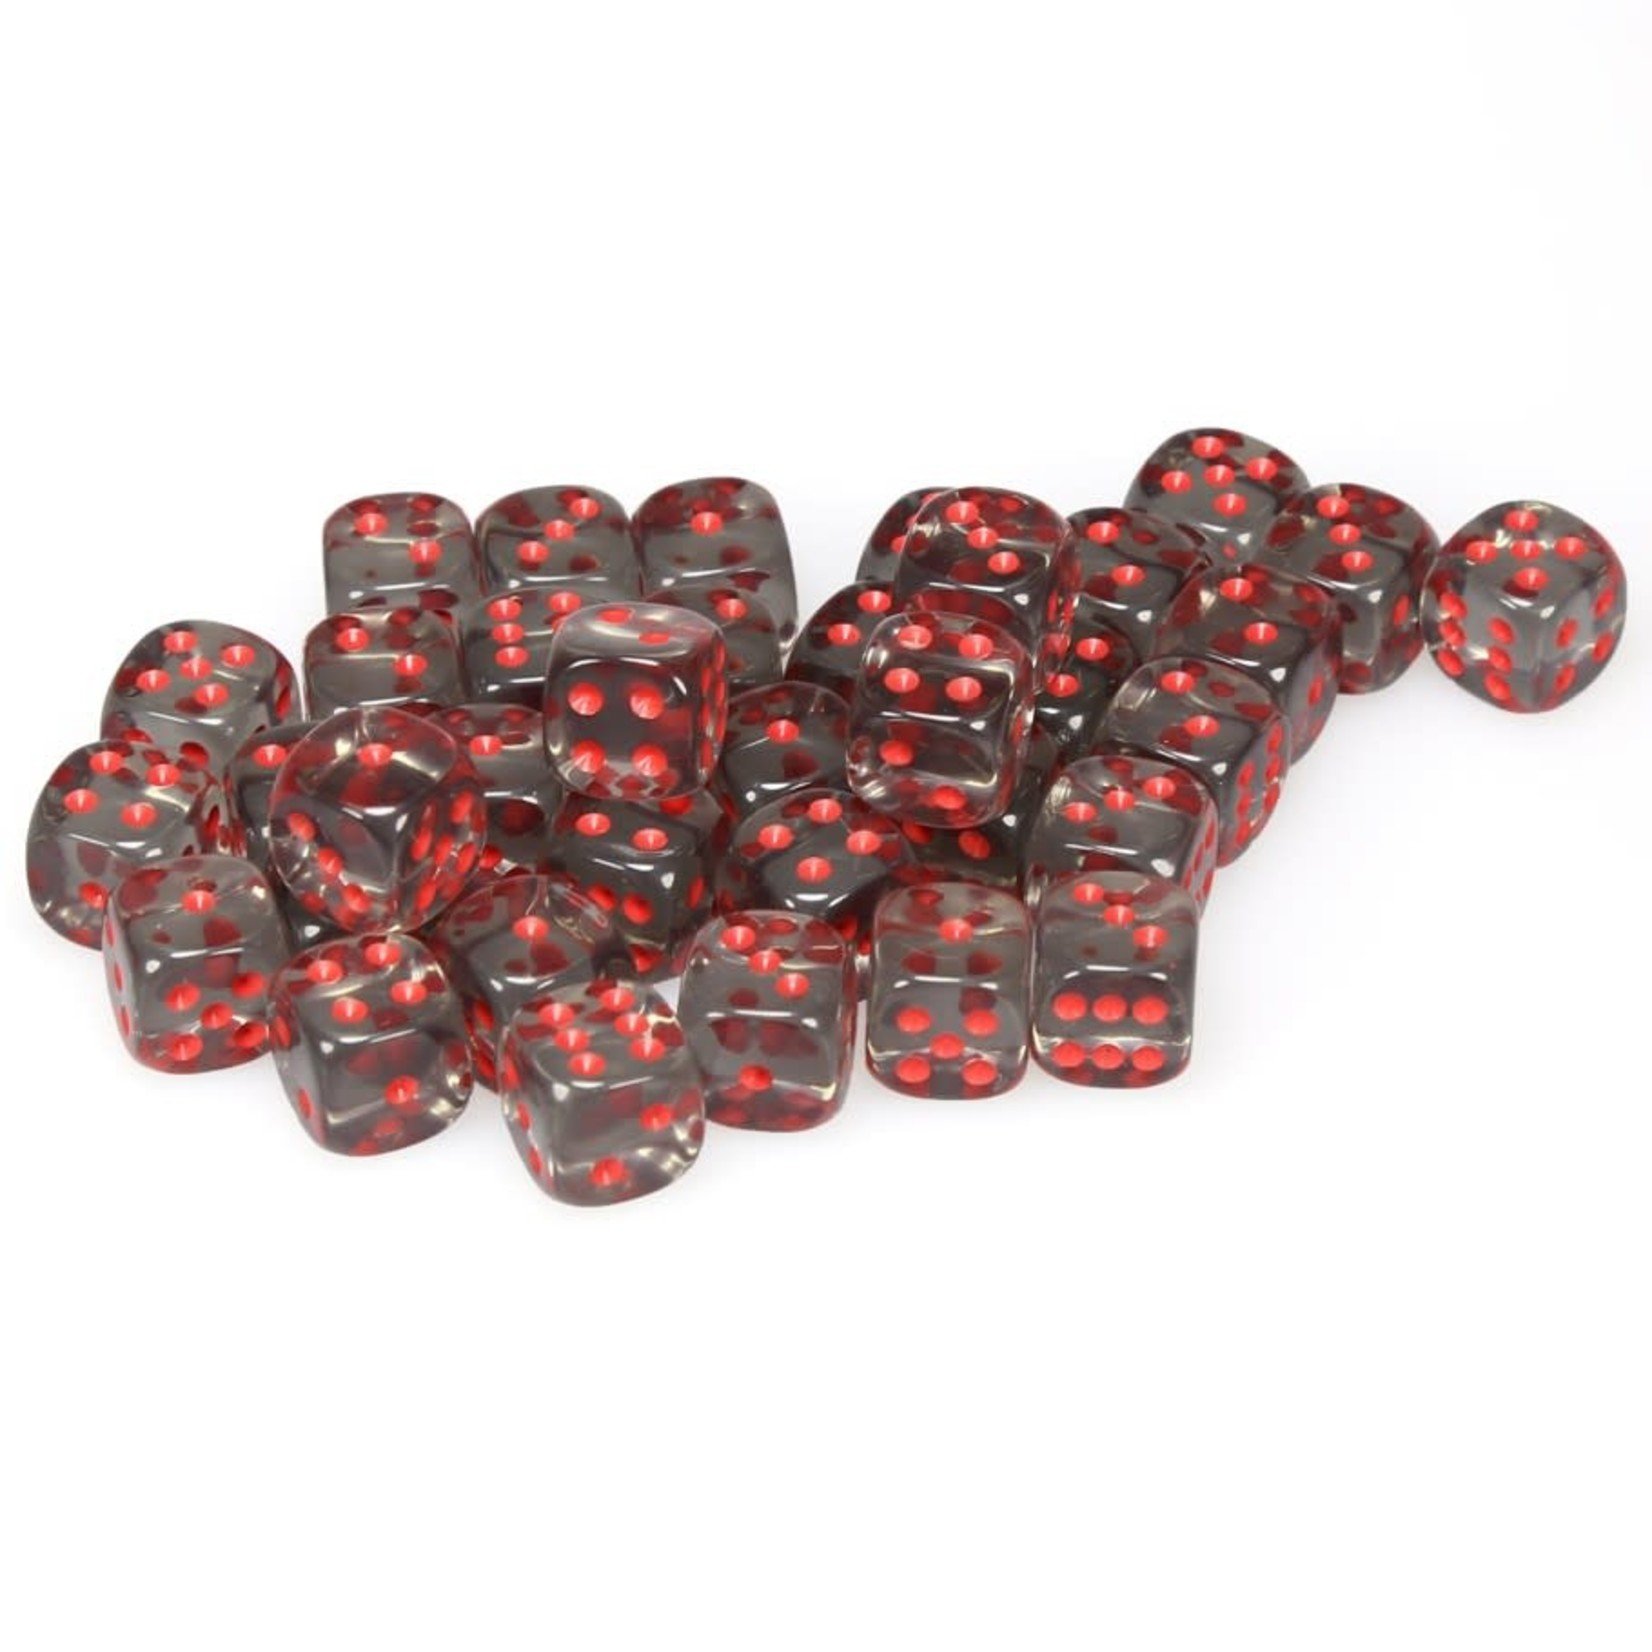 Chessex Chessex Translucent Smoke with Red 12 mm d6 36 die set